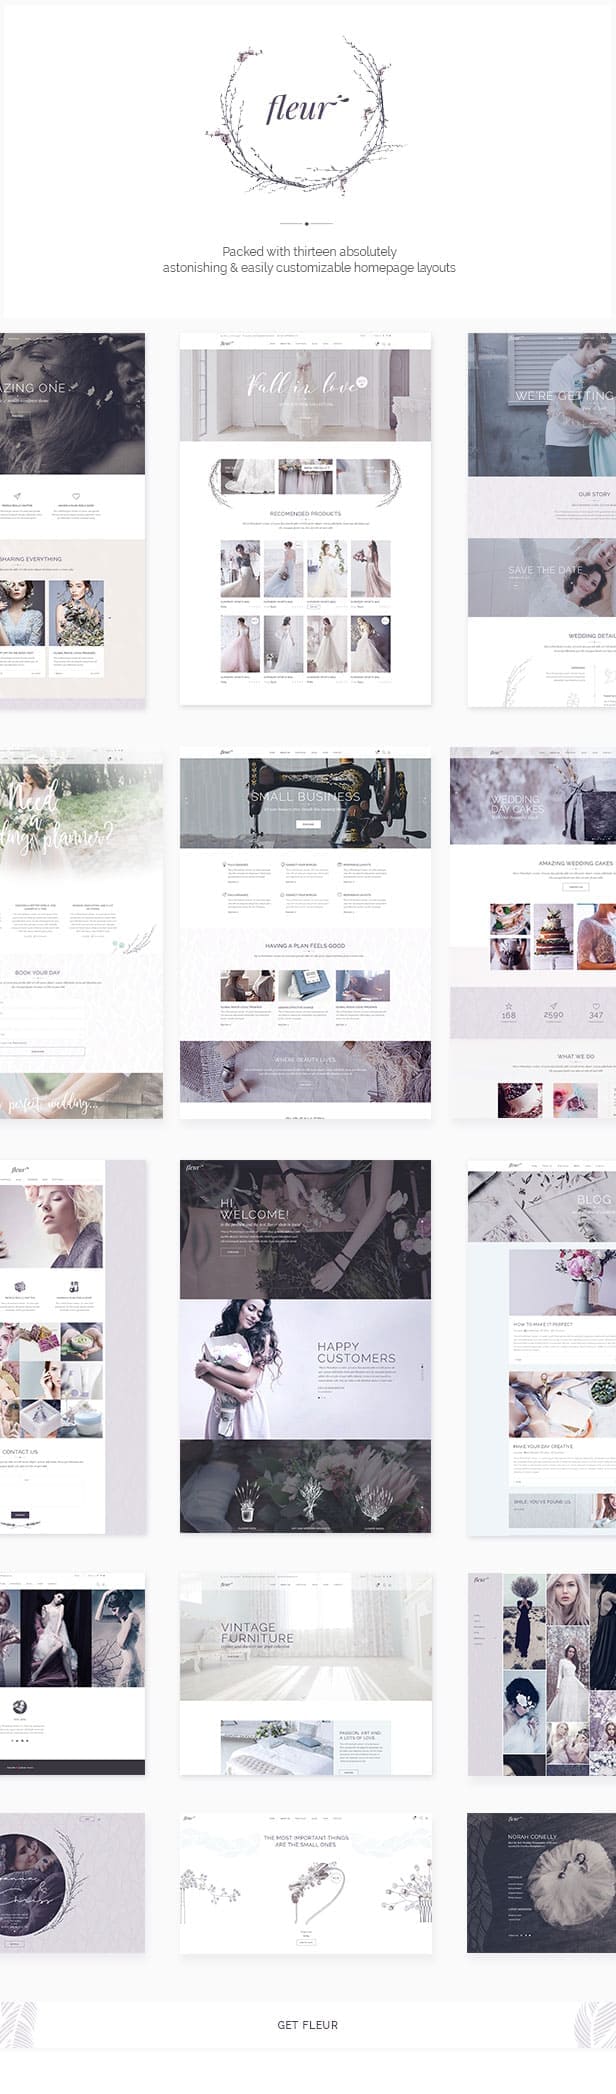 Fleur, Packed with thirteen absolutely astonishing & easily customizable homepage layouts.